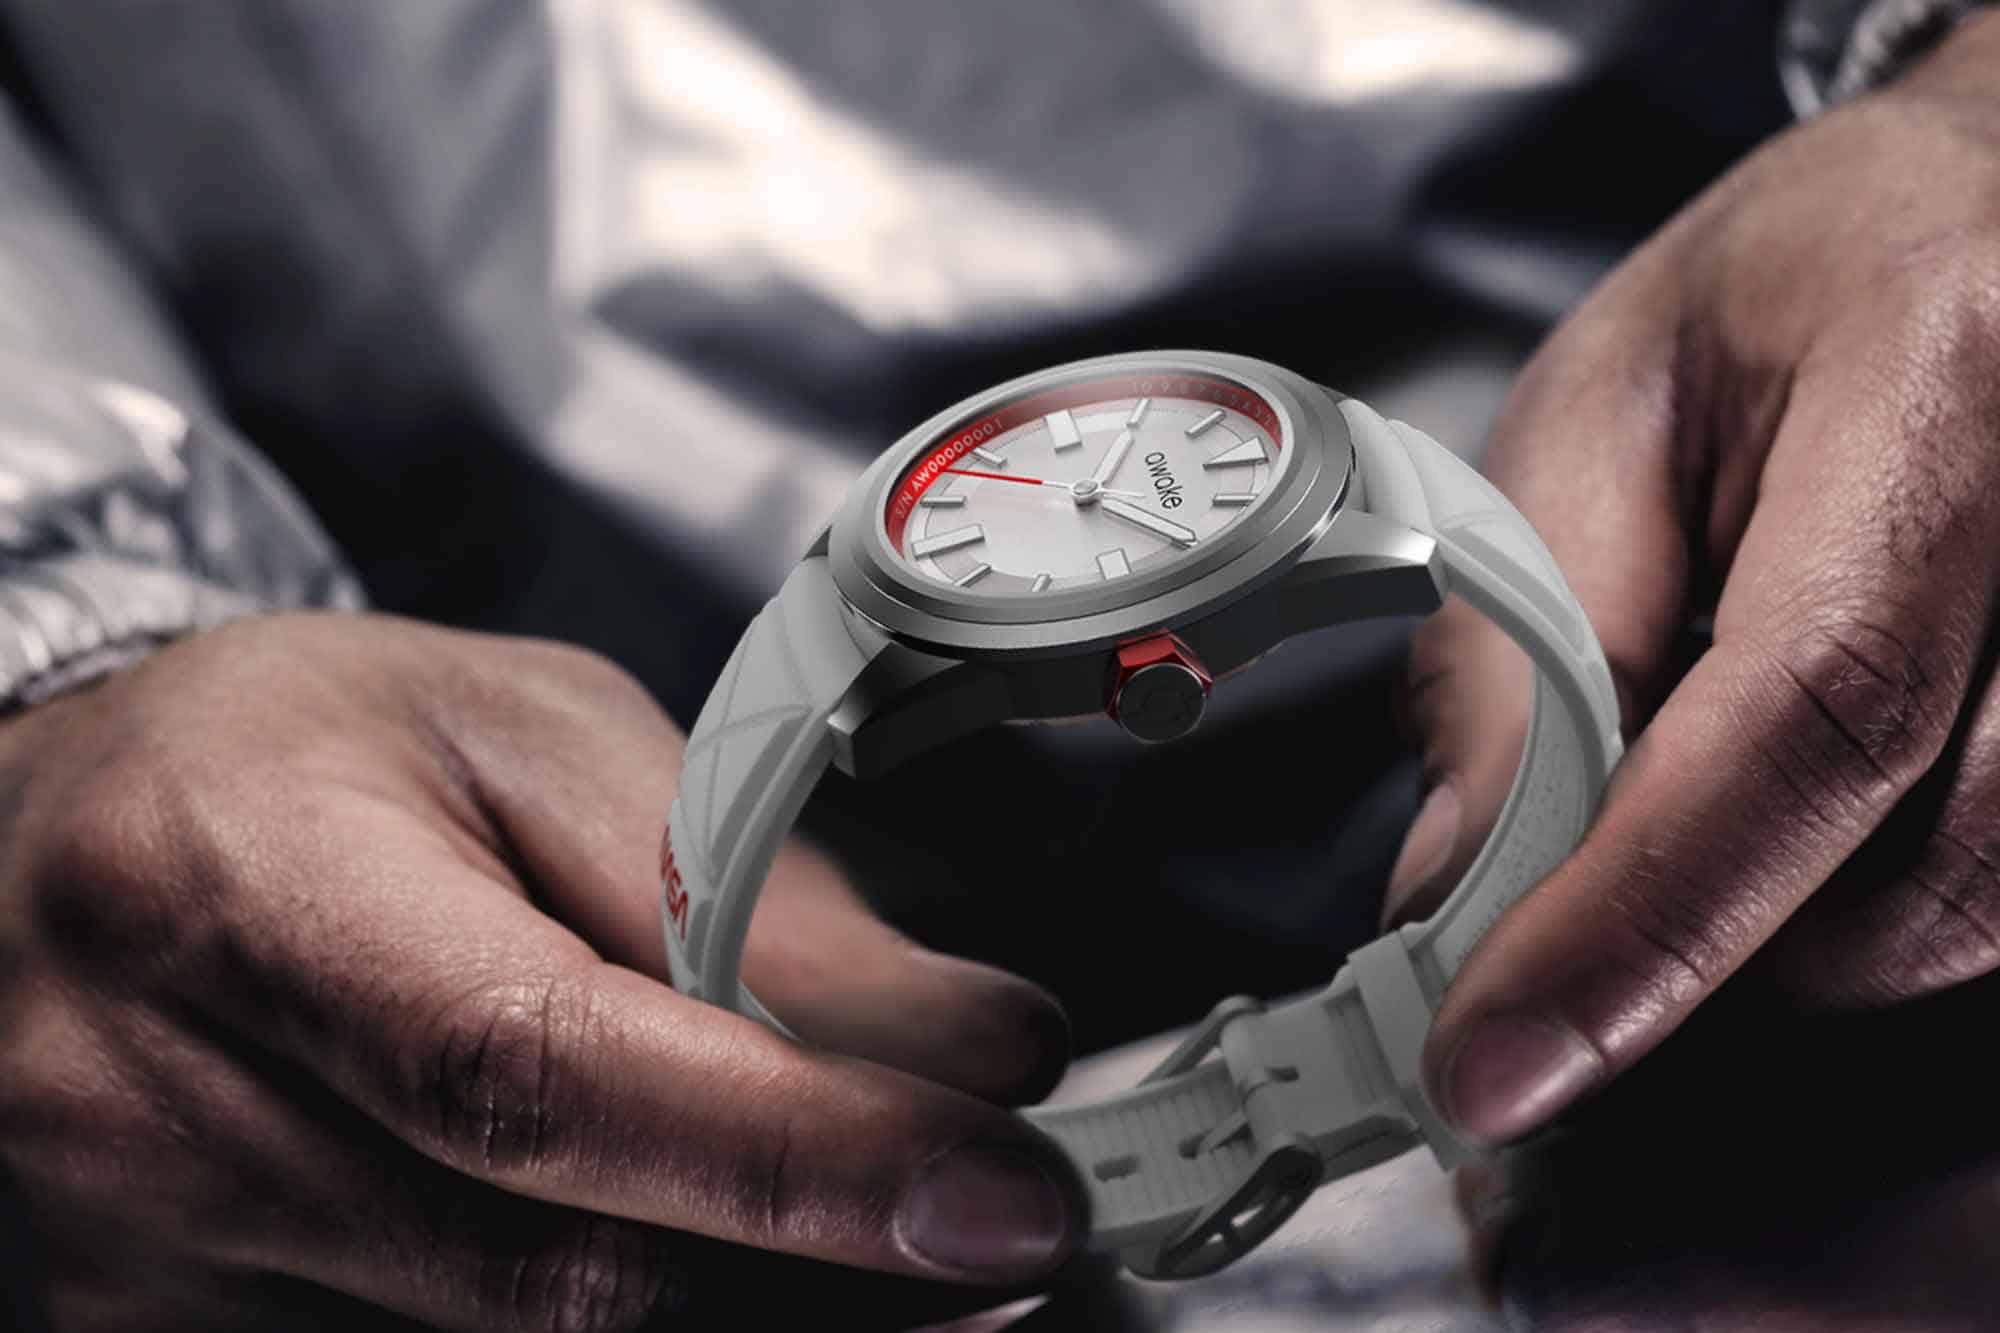 The New “Mission to Earth” Watch from Awake Uses the Blockchain in a New Way, and is NASA Approved